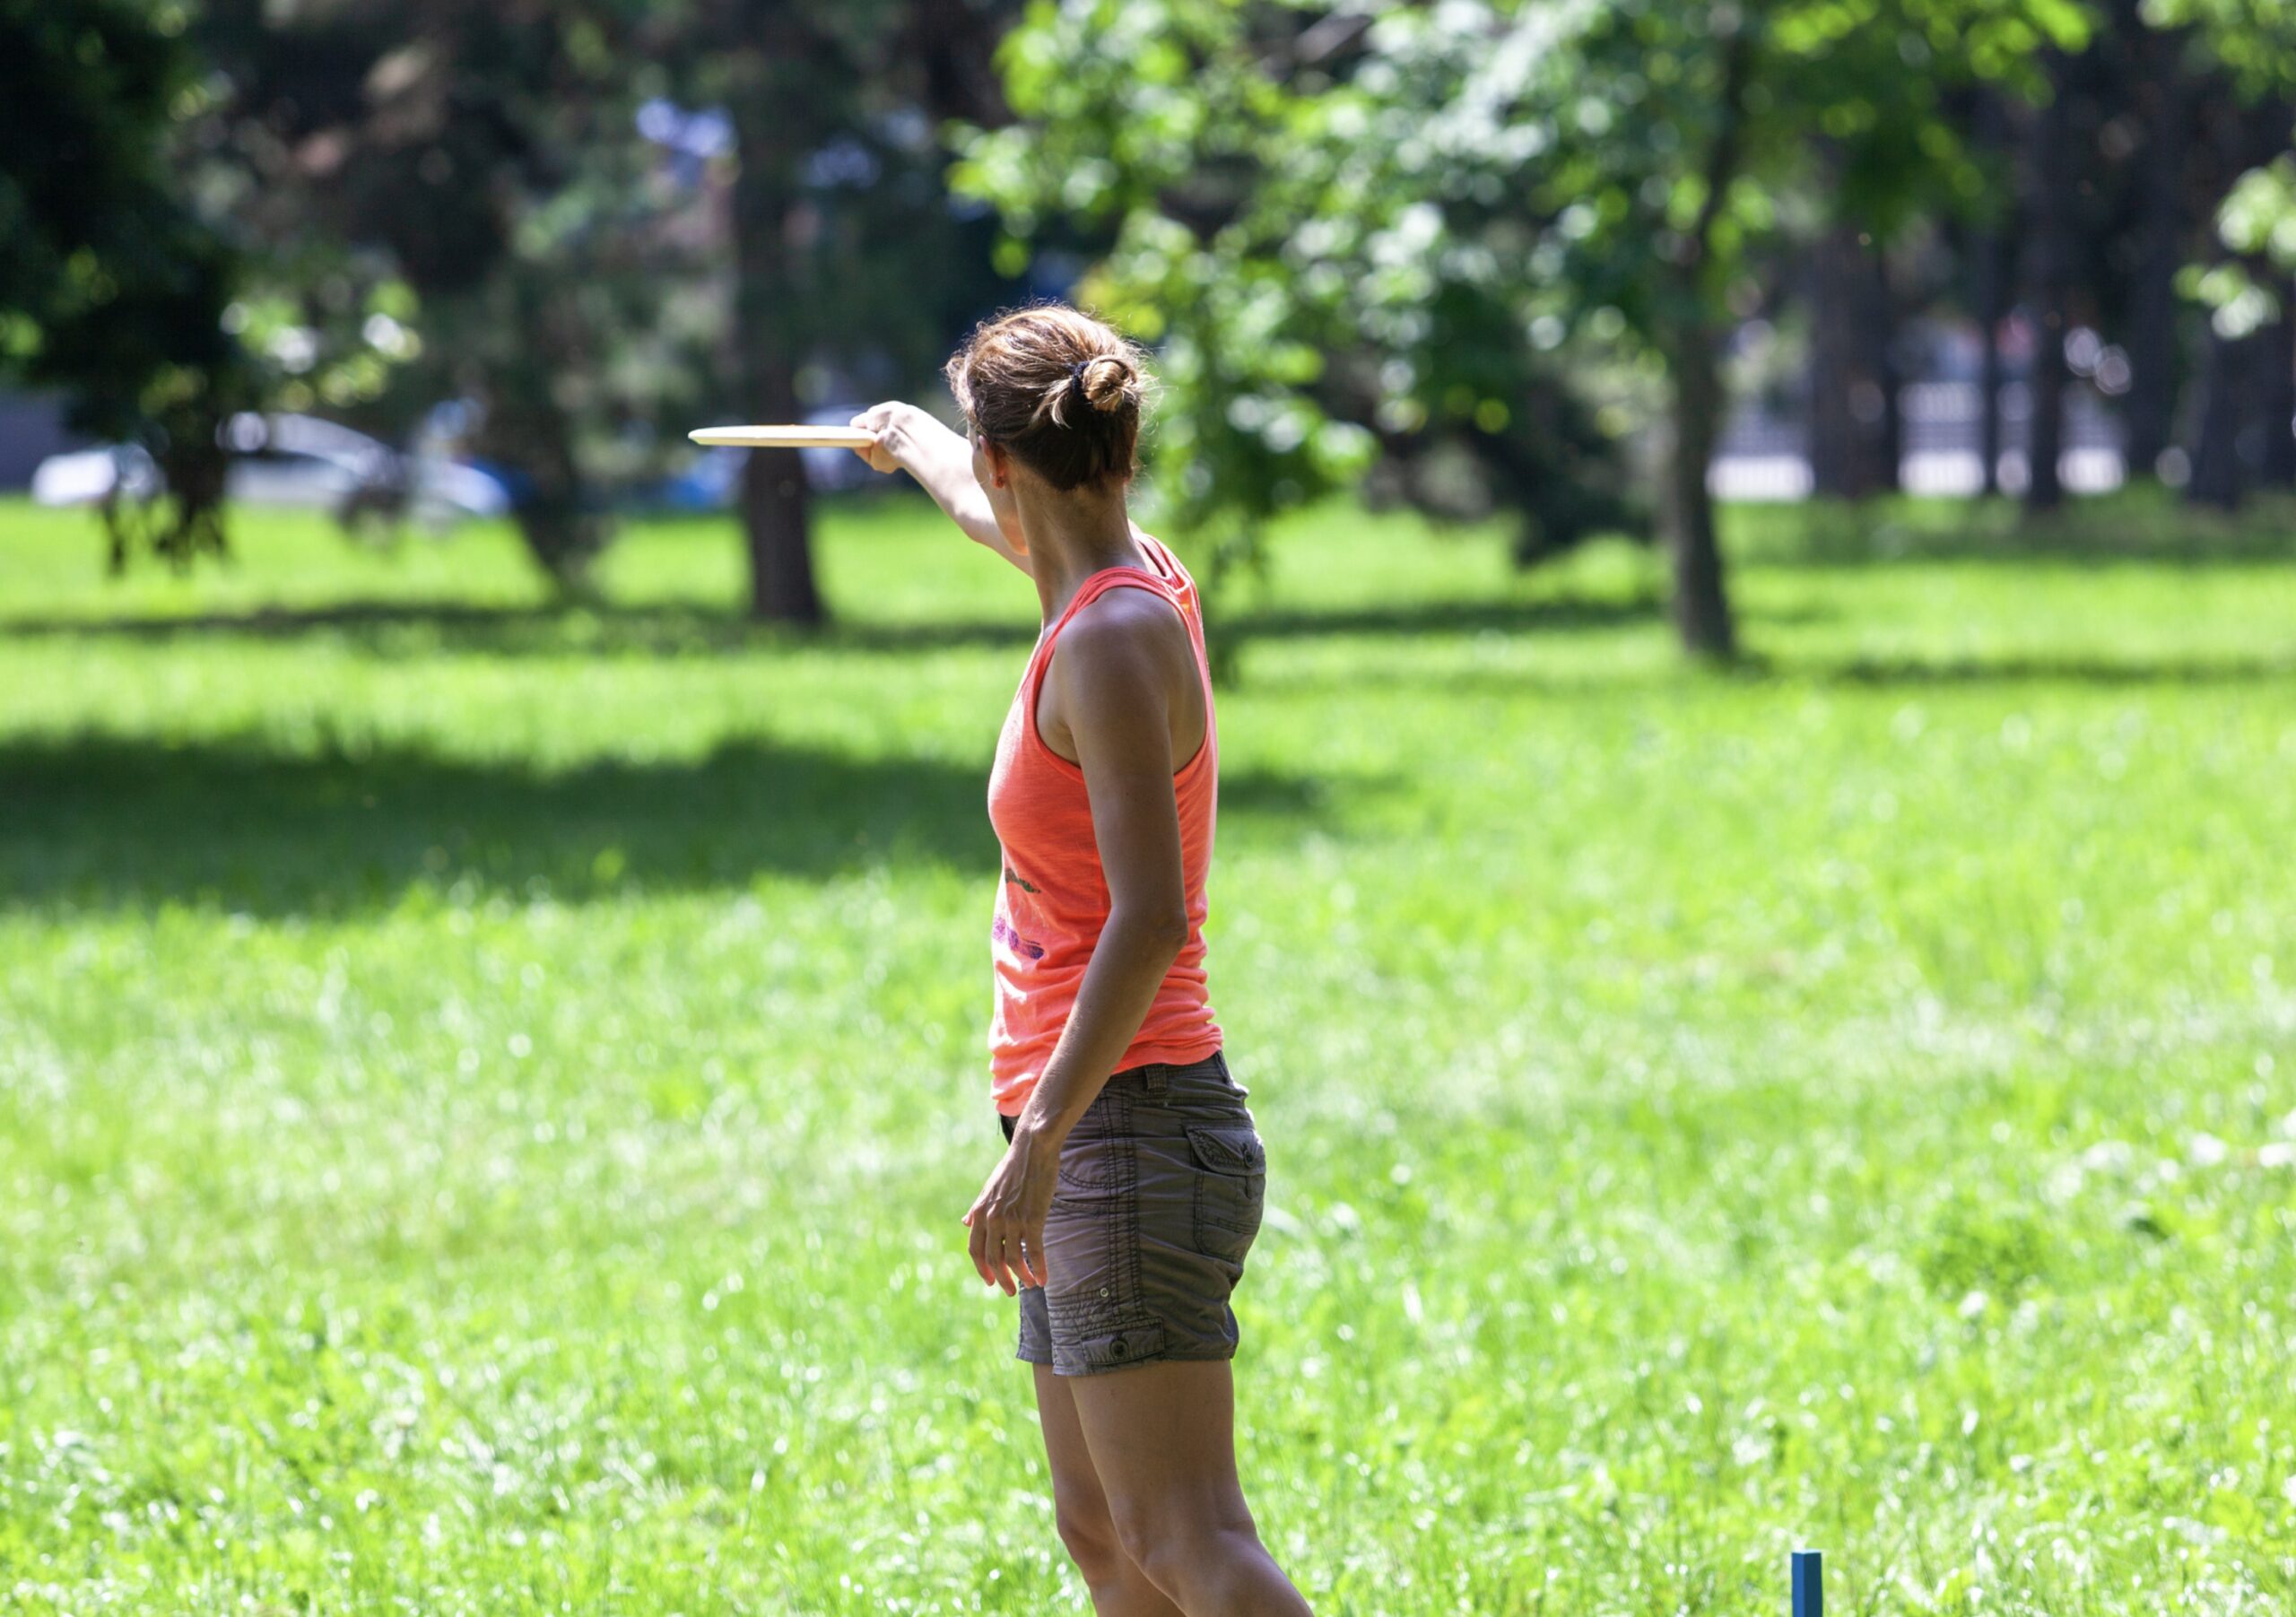 Common Disc Golf Mistakes to Avoid: Improve Your Game